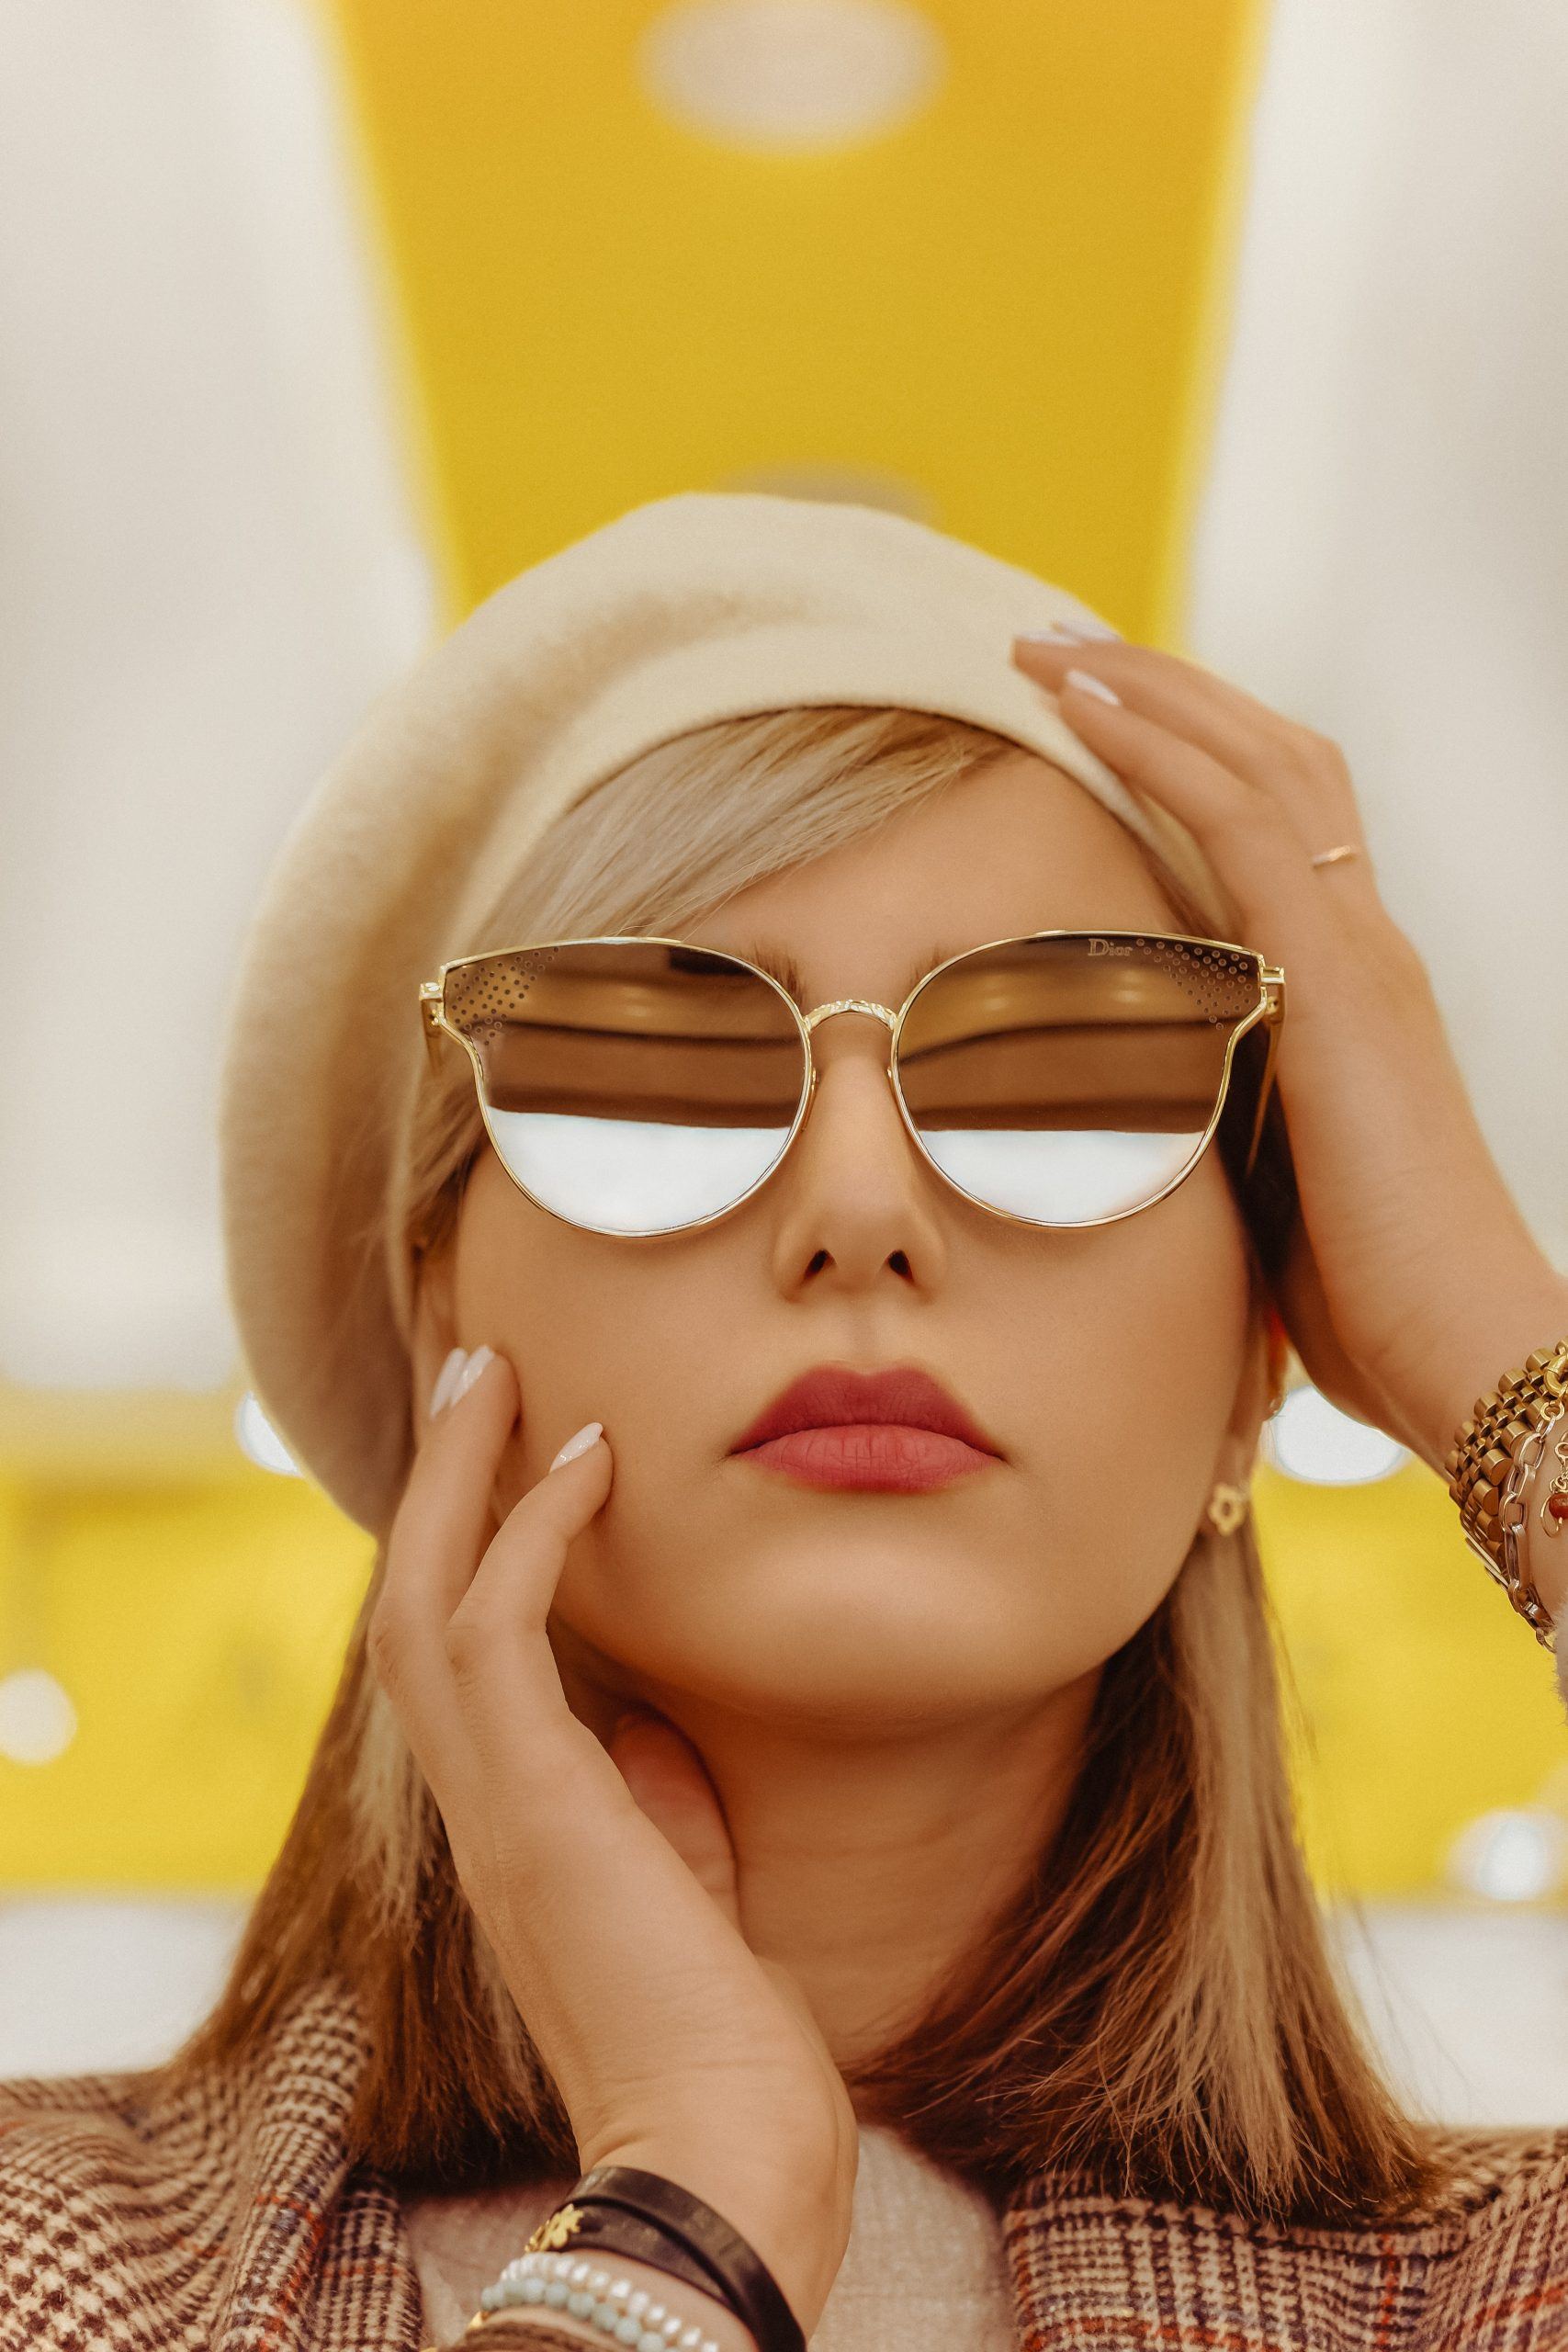 Sunglasses – For Your Wellbeing or Just Fashion Wear?